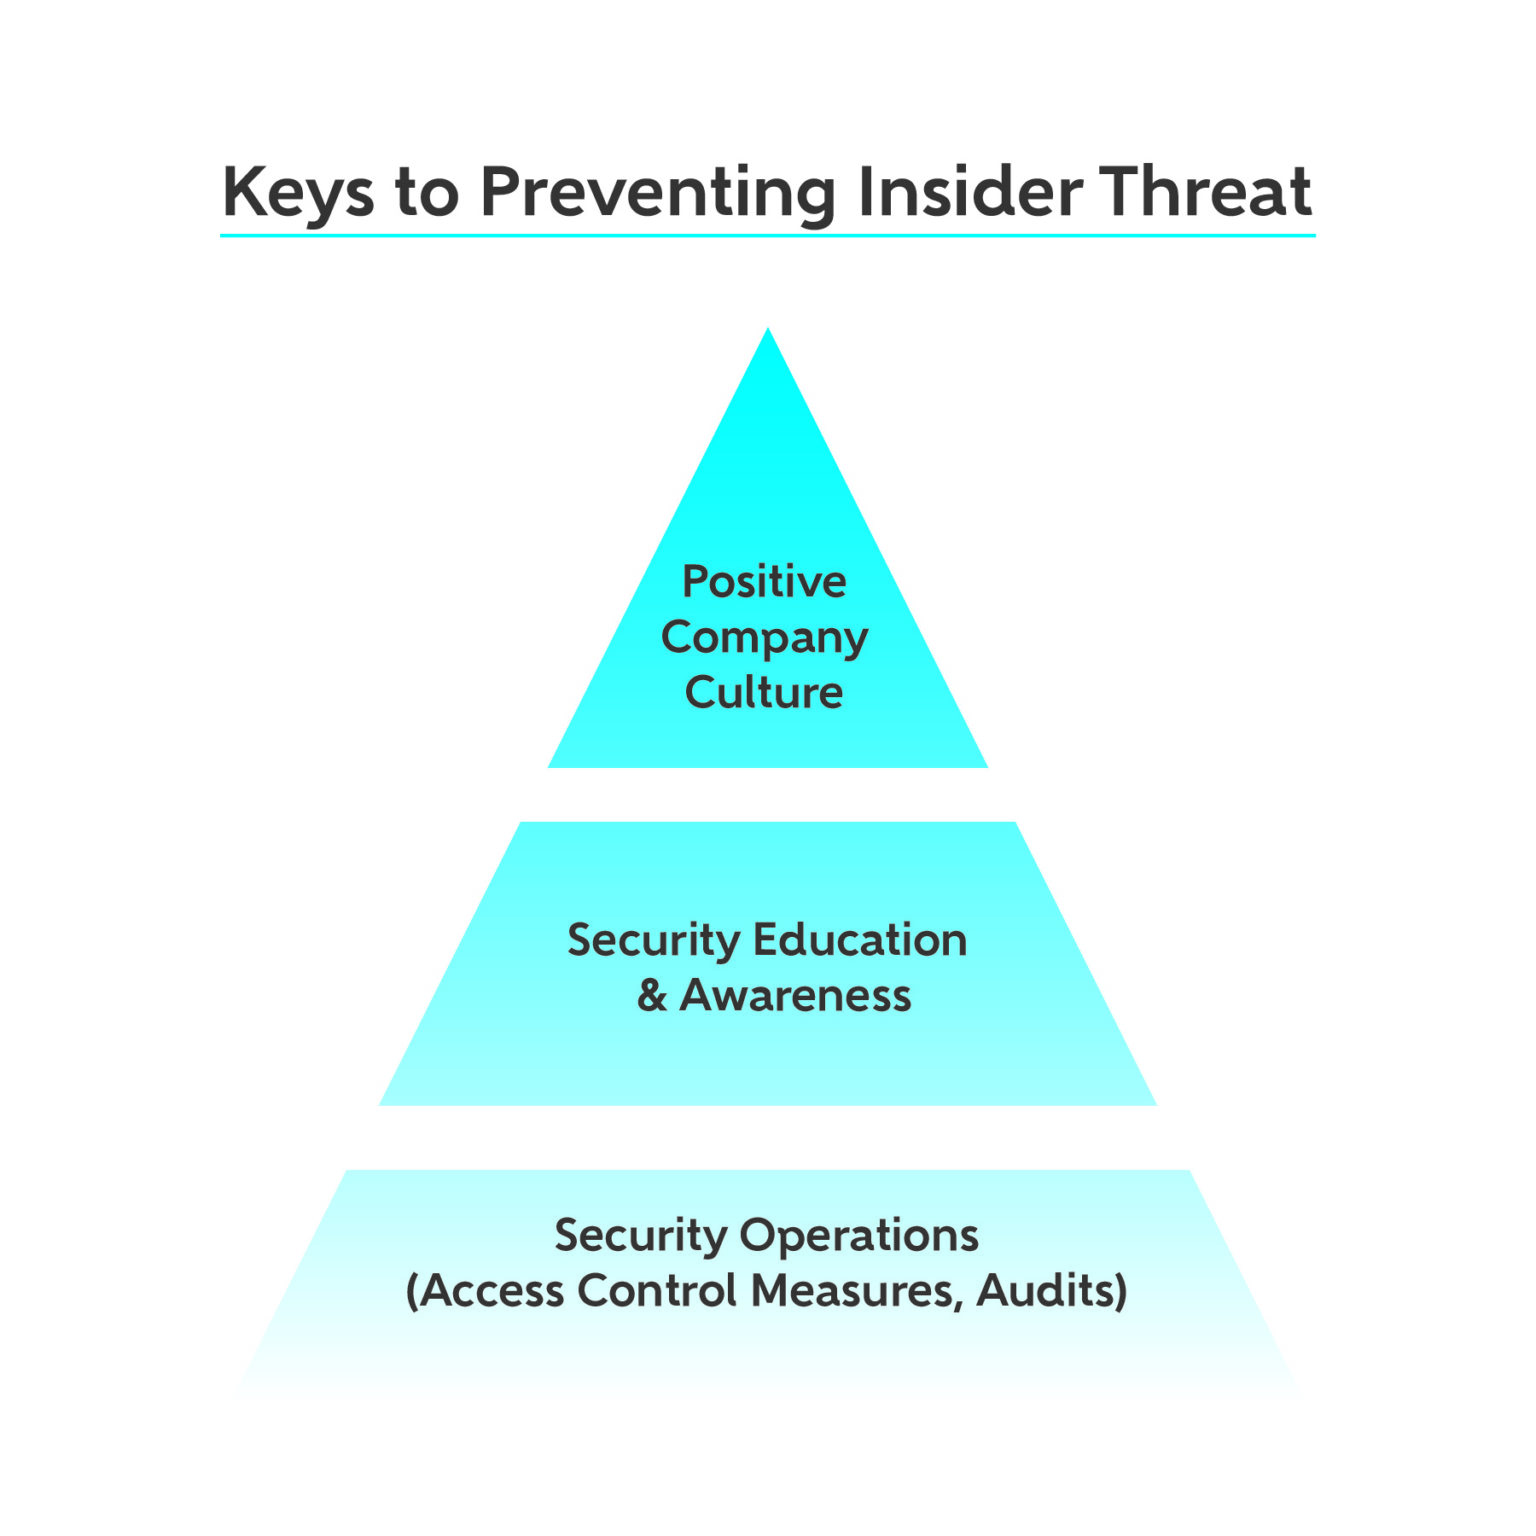 How to Prevent and Detect Insider Threat - Adamo Security